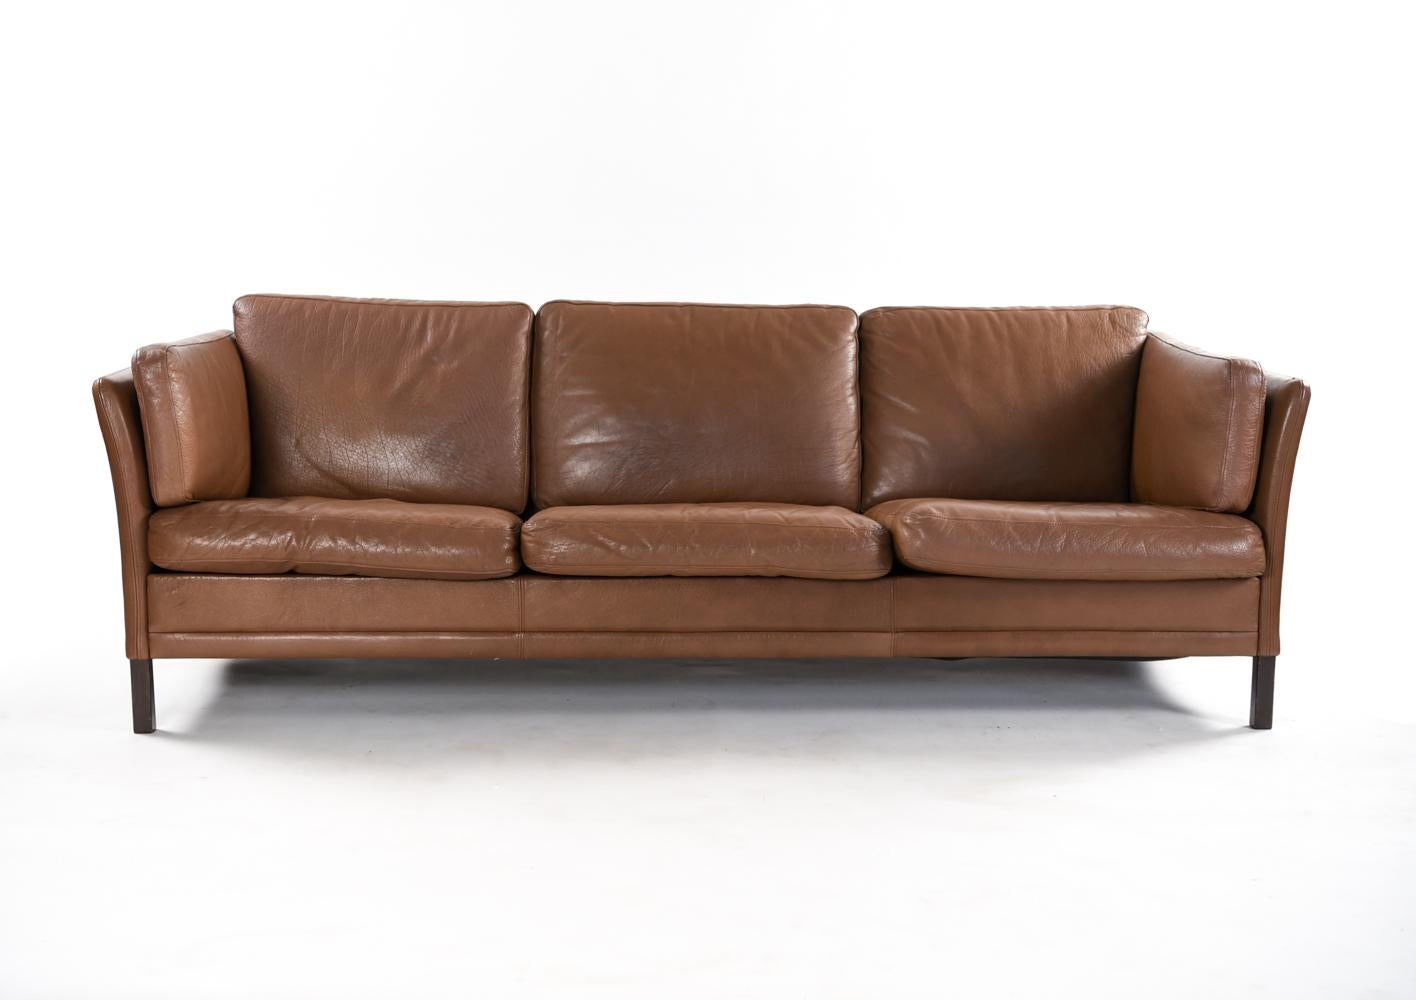 A beautiful Danish midcentury sofa in caramel leather which can seat three comfortably. Made by Mogens Hansen, this sofa is a wonderful example of modern design with subtle lines and form. The leather is showing an attractive patina from age.